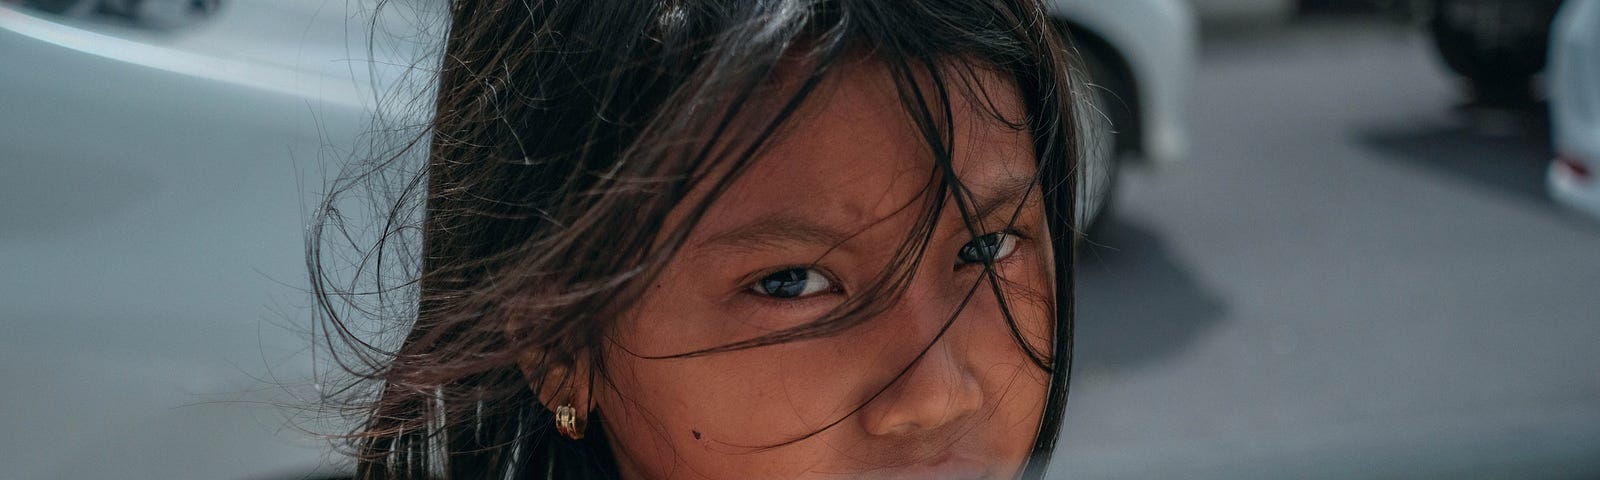 A child in the street, approaching a car window — looking at you with a sad but hopeful view in her eyes